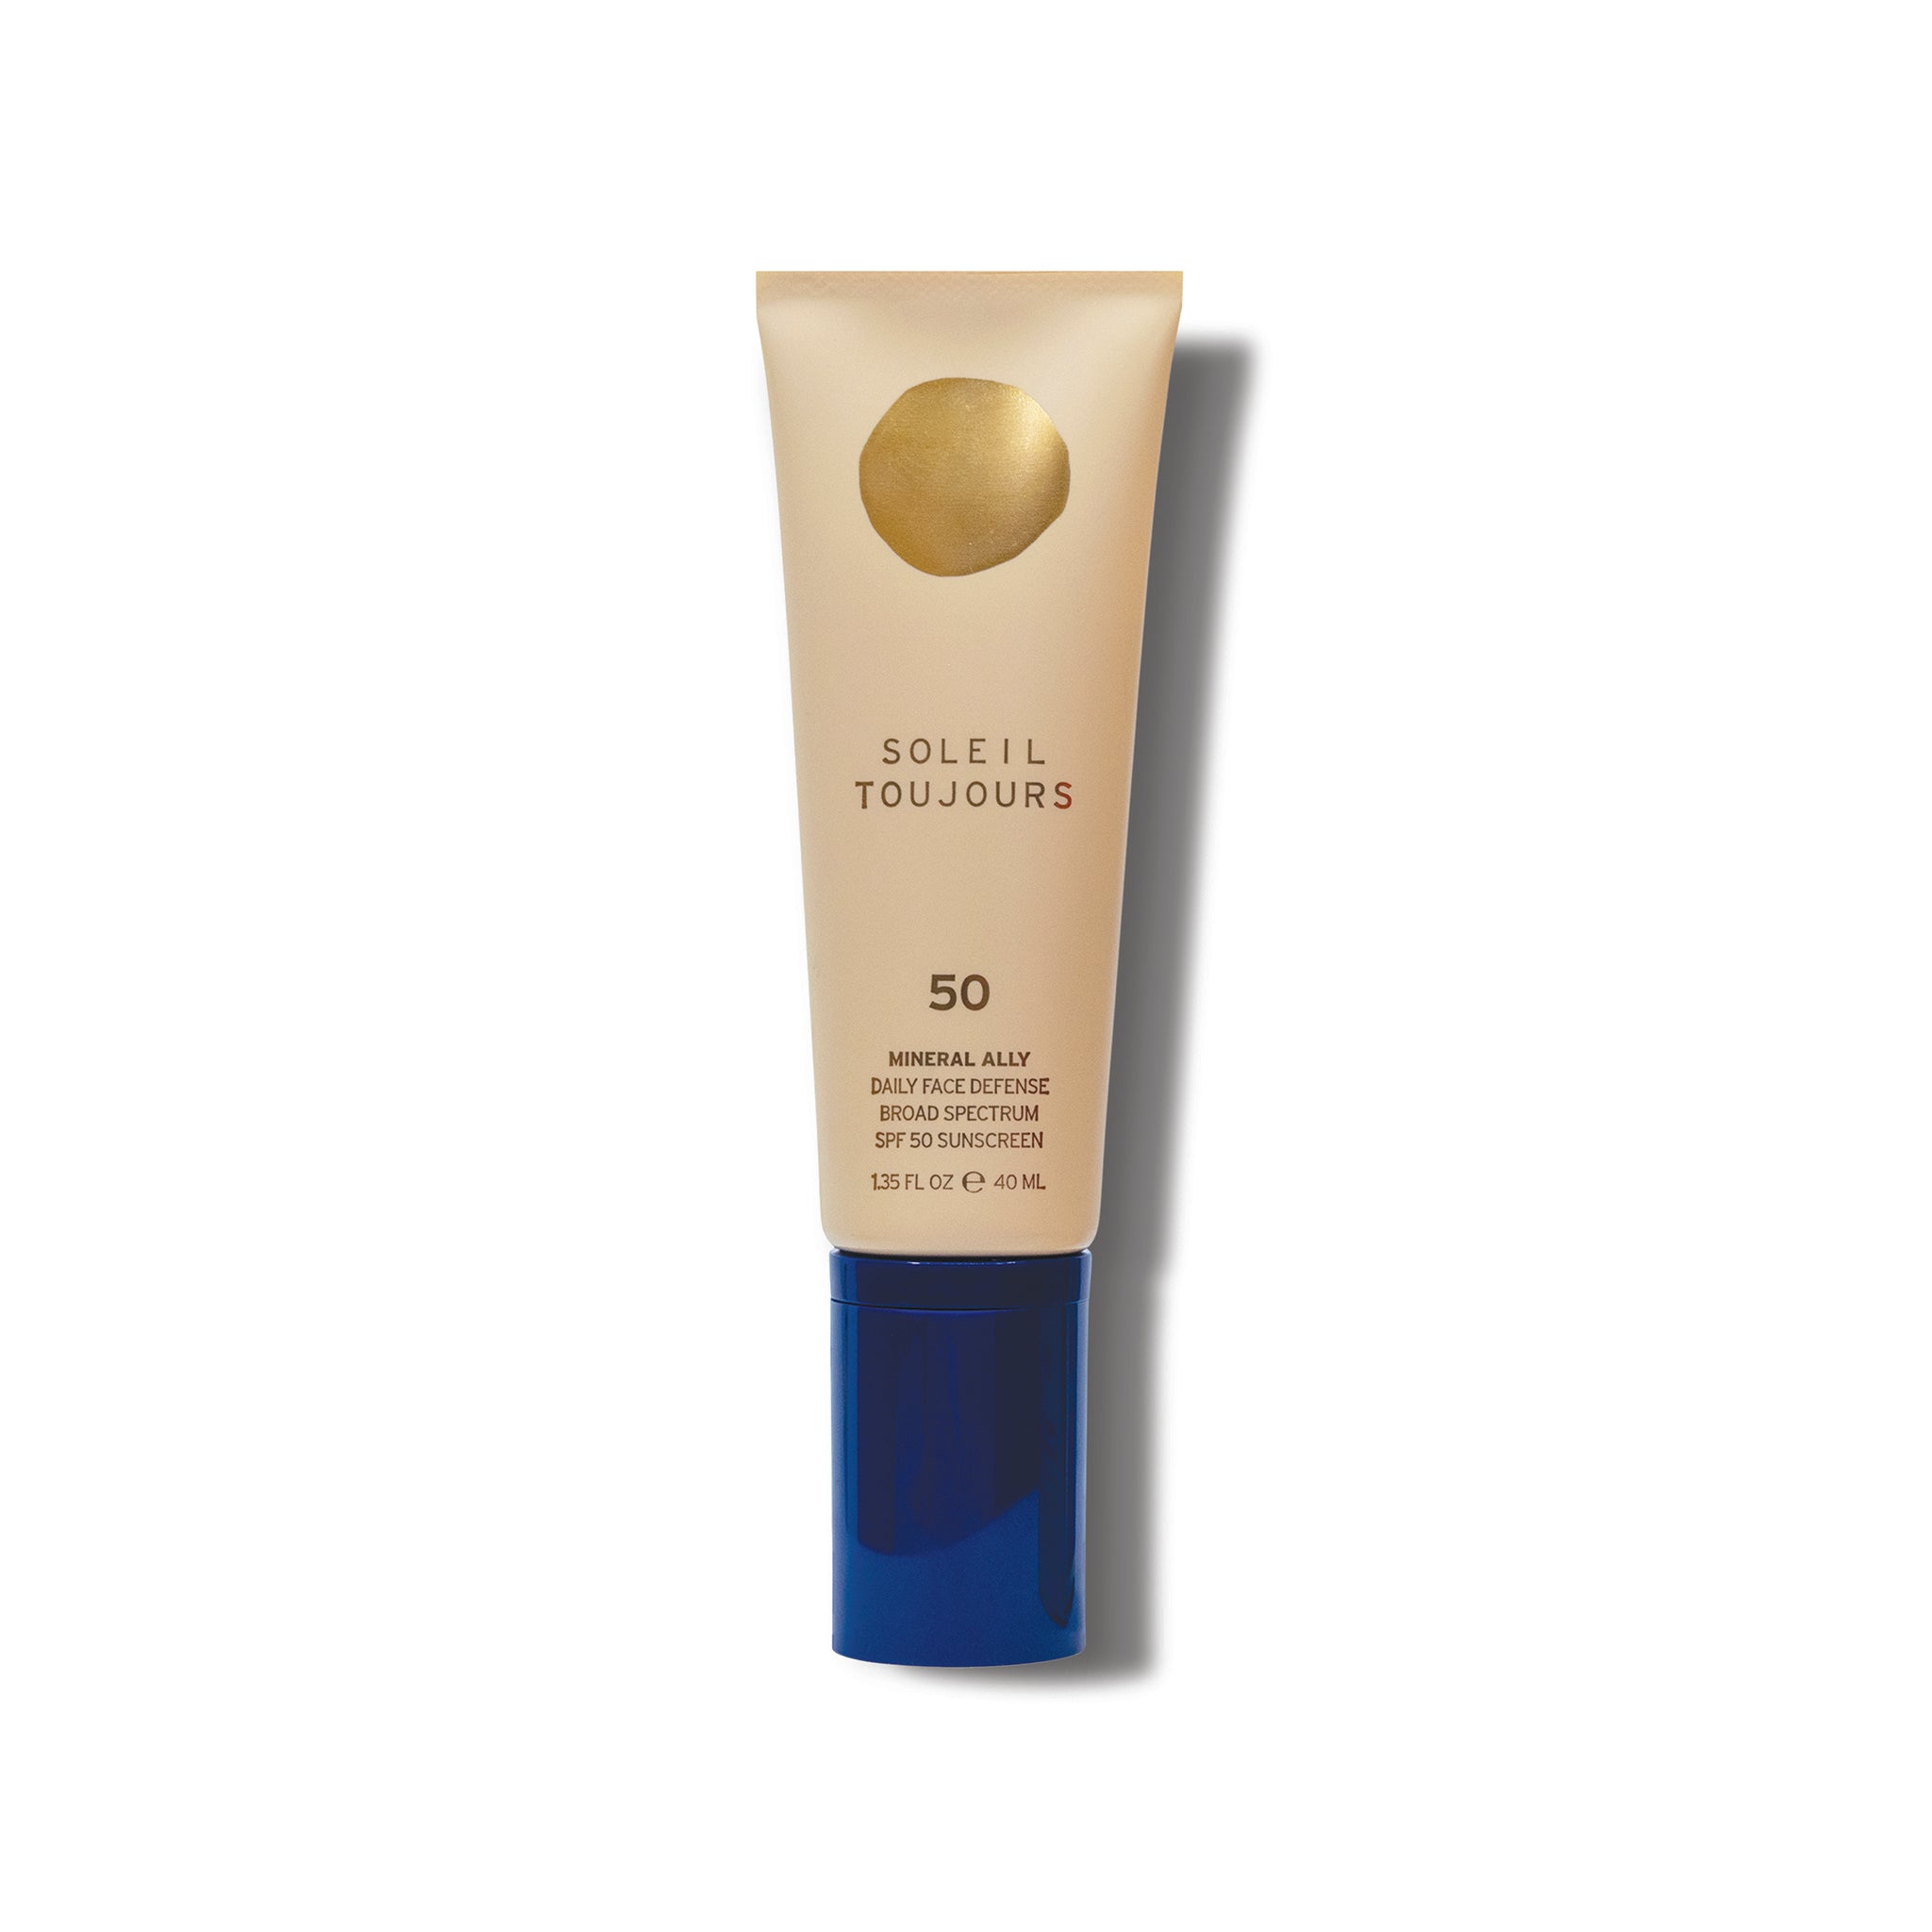 Soleil Toujours Mineral Ally Daily Defense SPF50